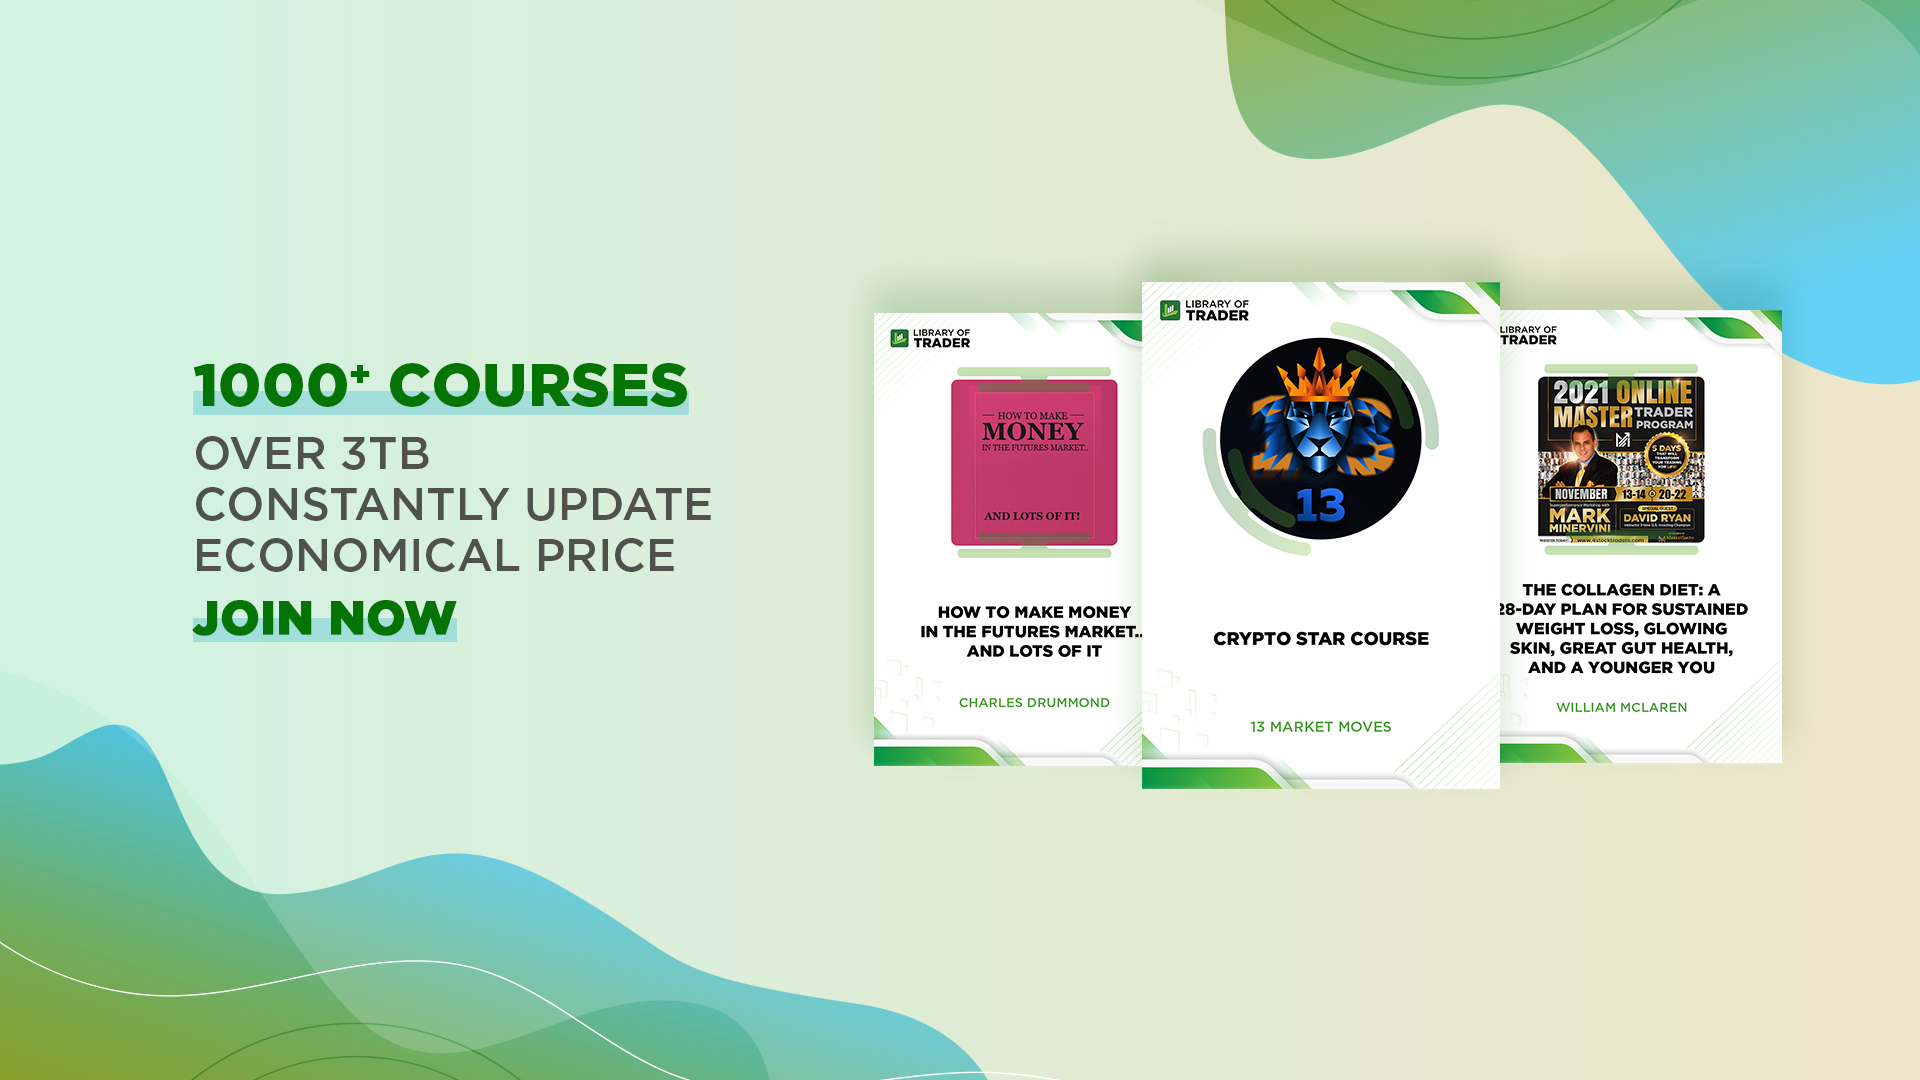 Library of Trader – Online Trading Courses Groupbuy Provider